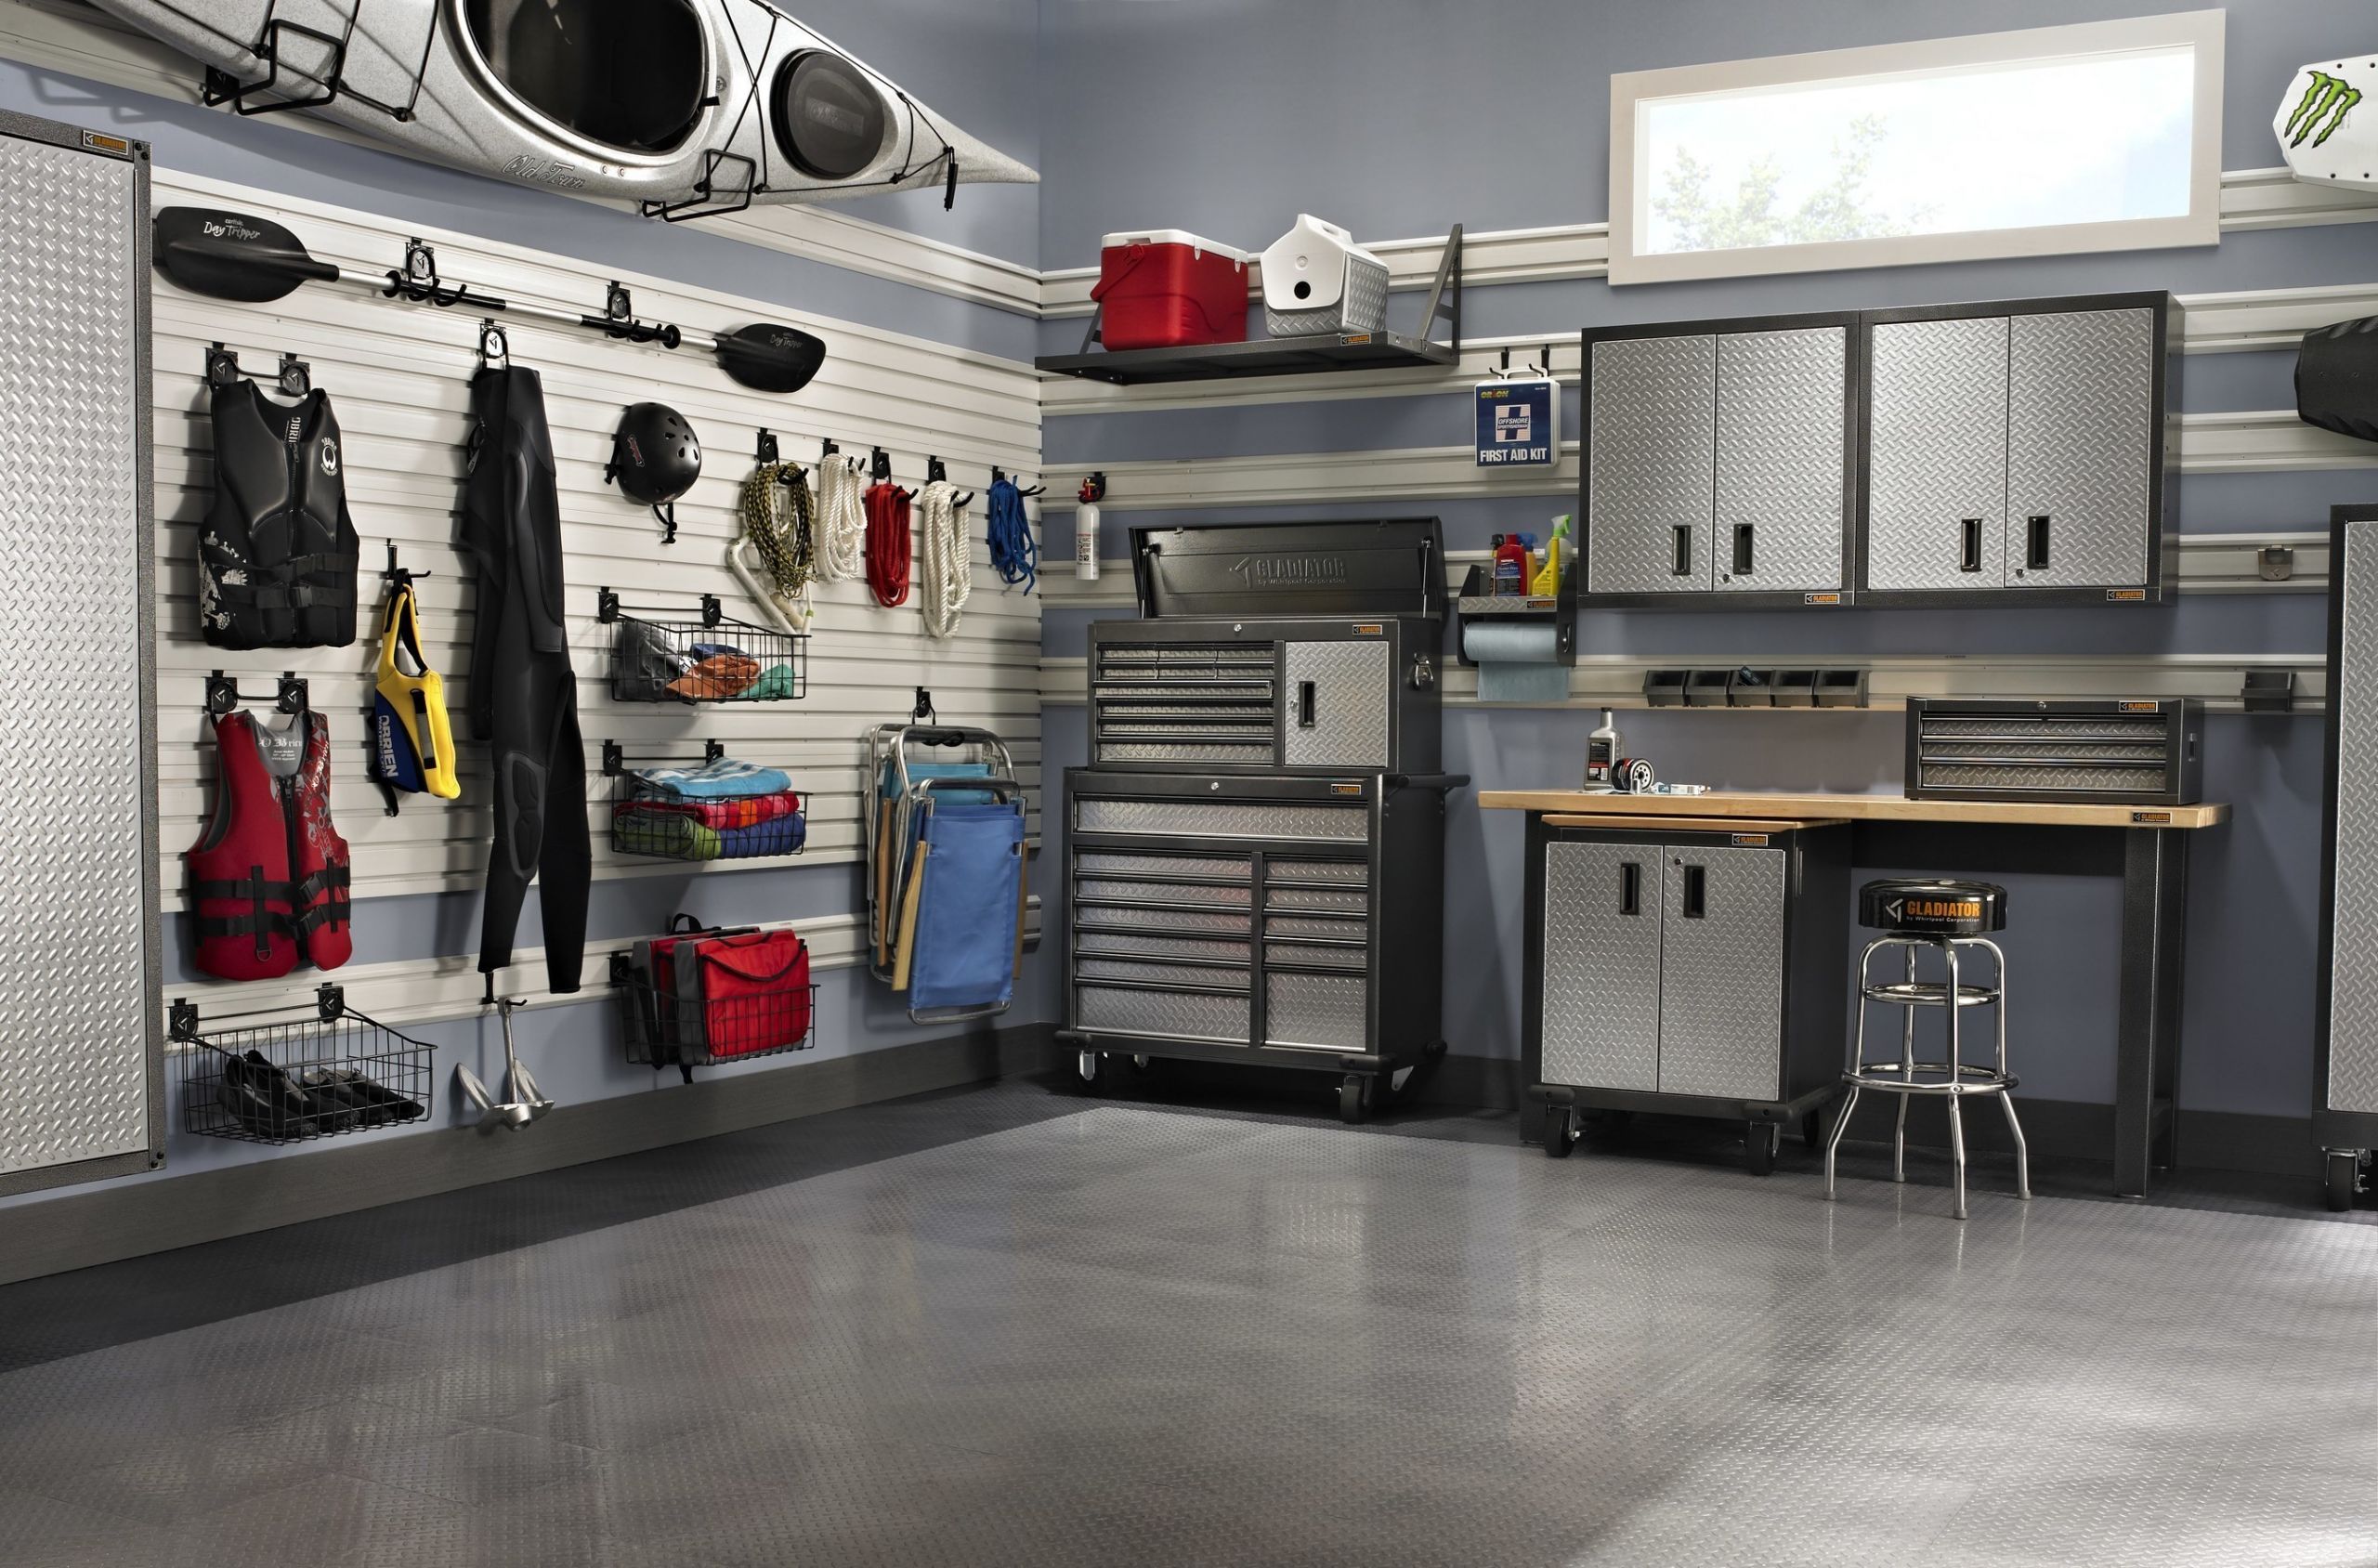 Organized Garage Images
 Almost 1 in 4 Americans Say Their Garage is Too Cluttered